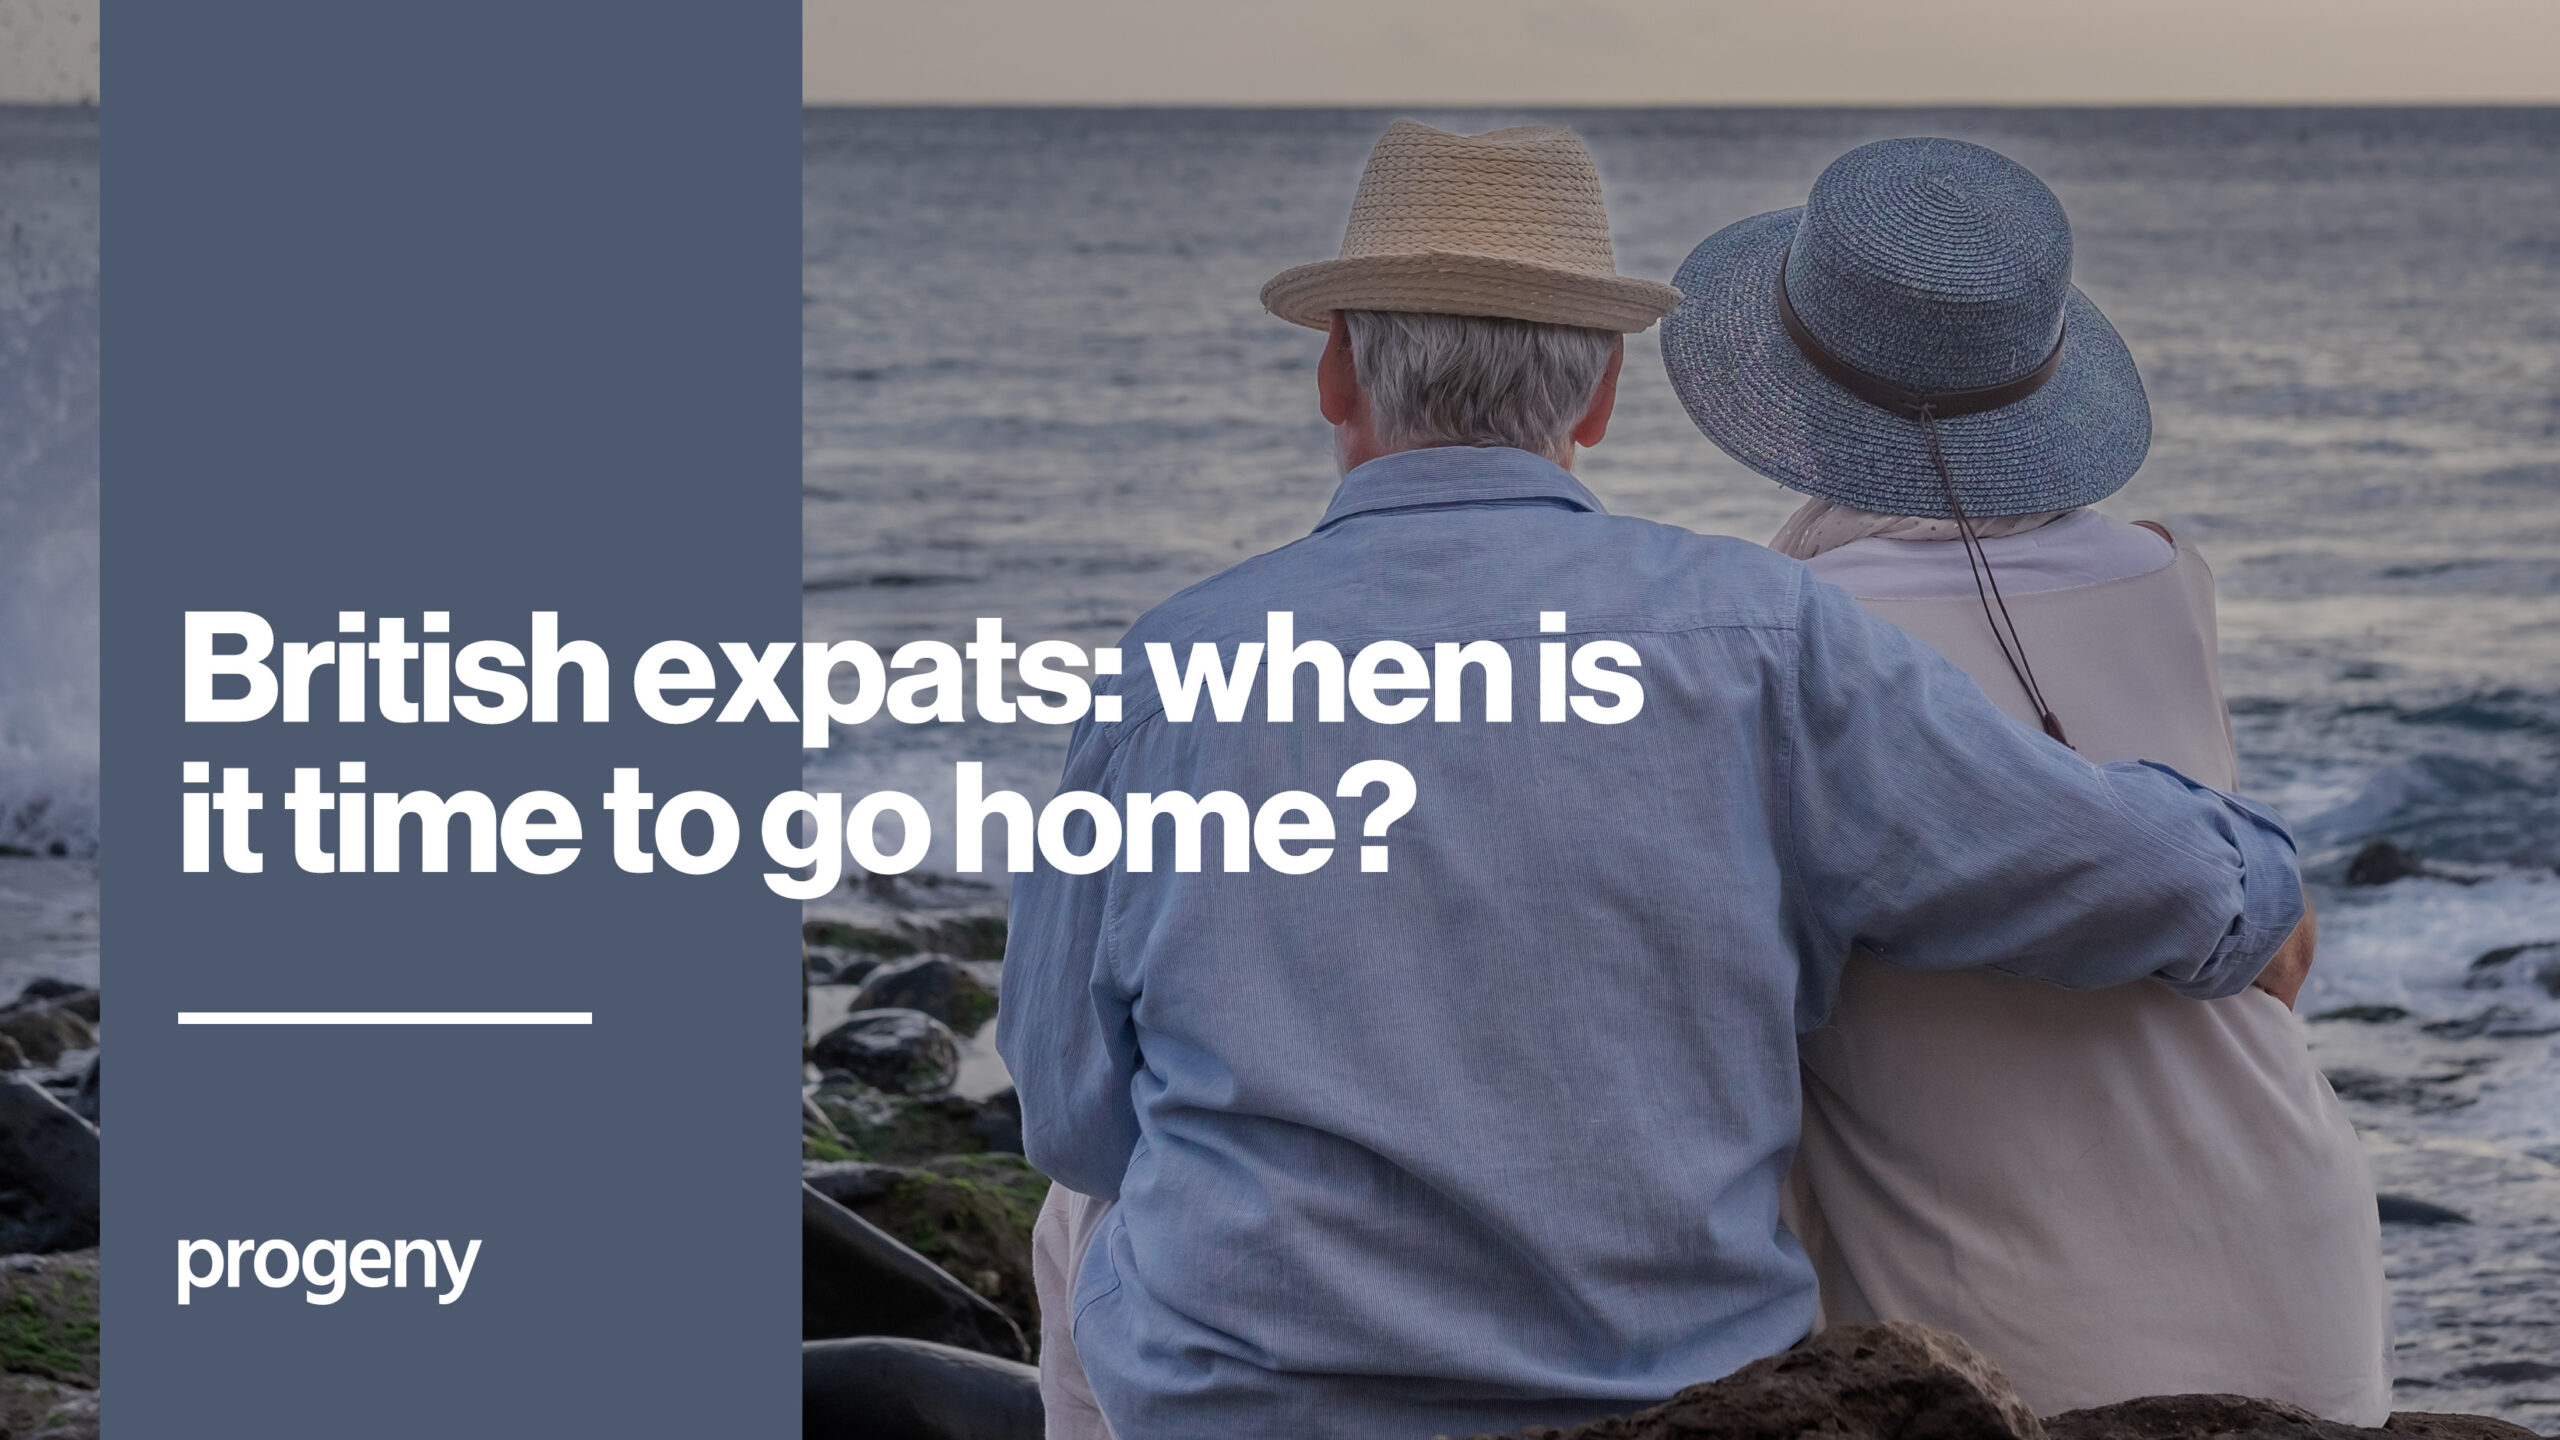 British expats- when is it time to go home